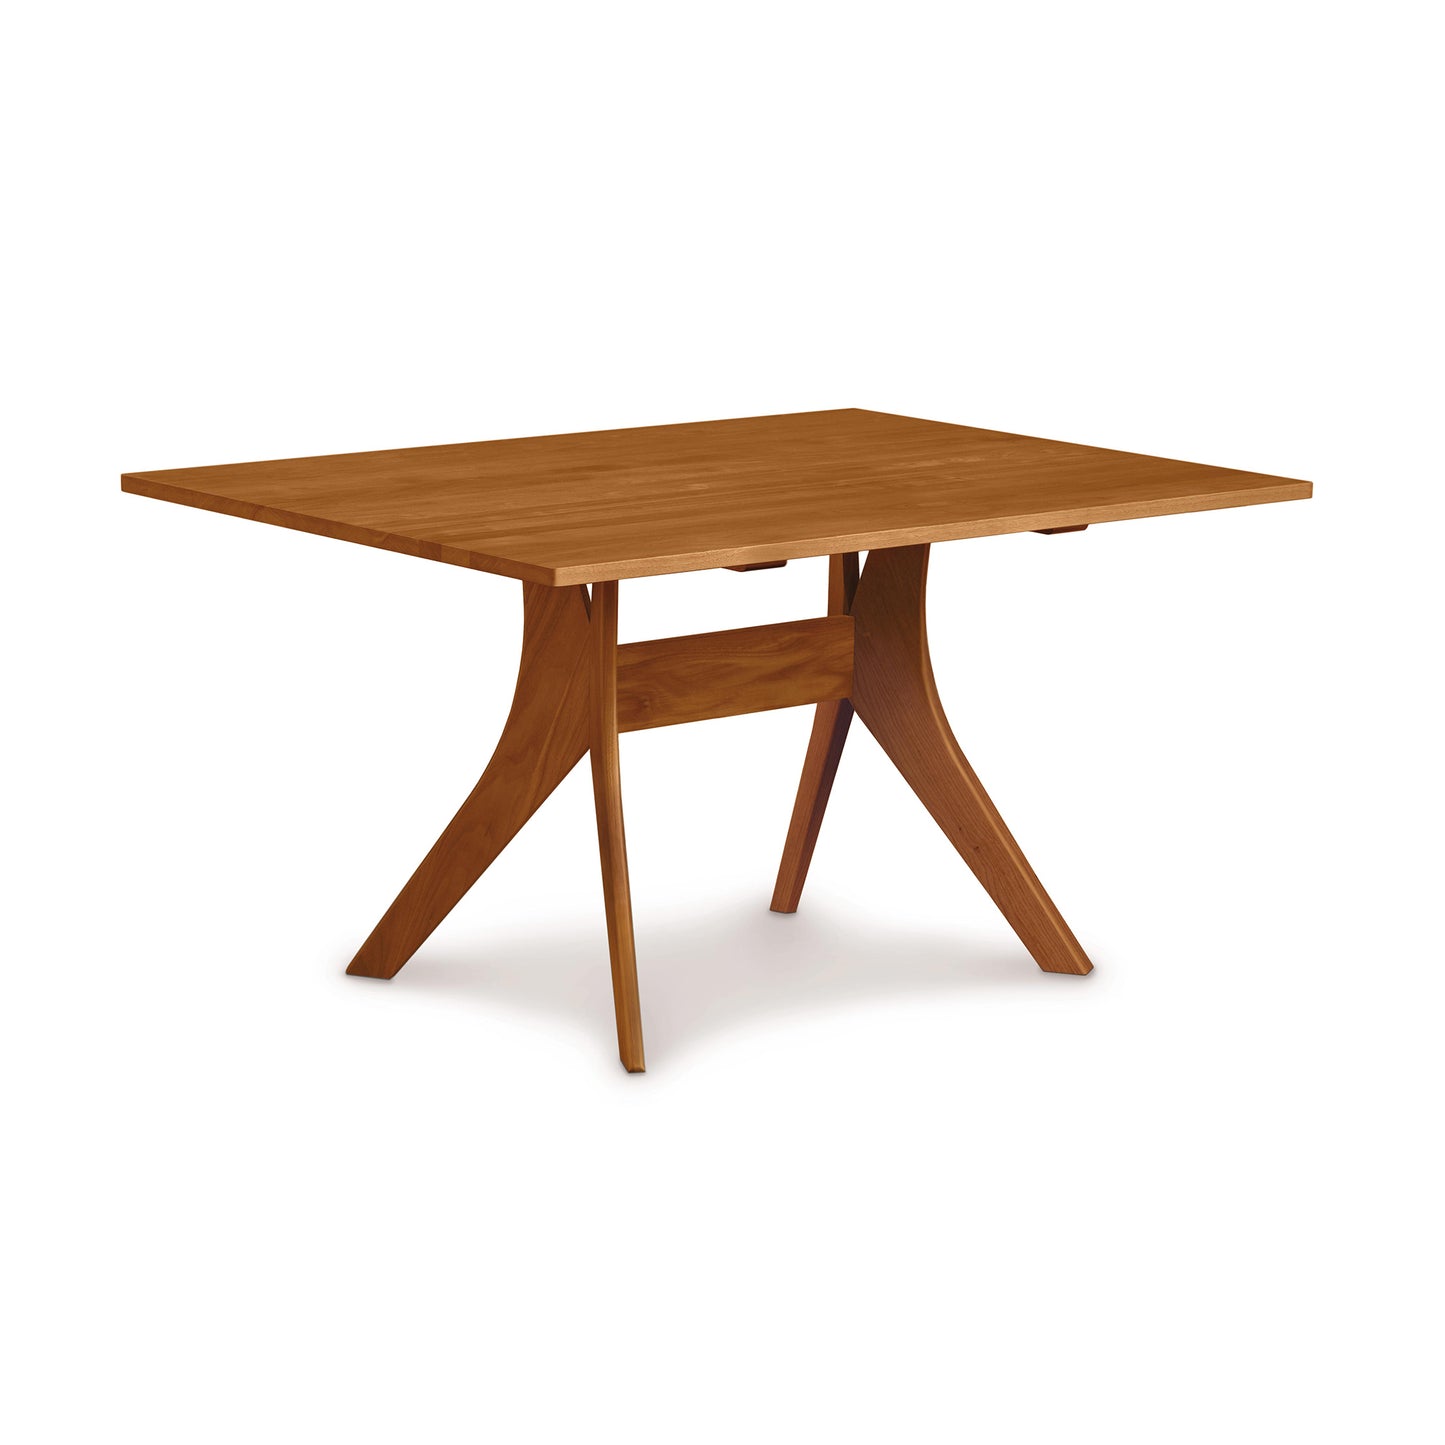 An Audrey Solid Top Dining Table by Copeland Furniture, handmade to order with a solid natural hardwood top and legs.